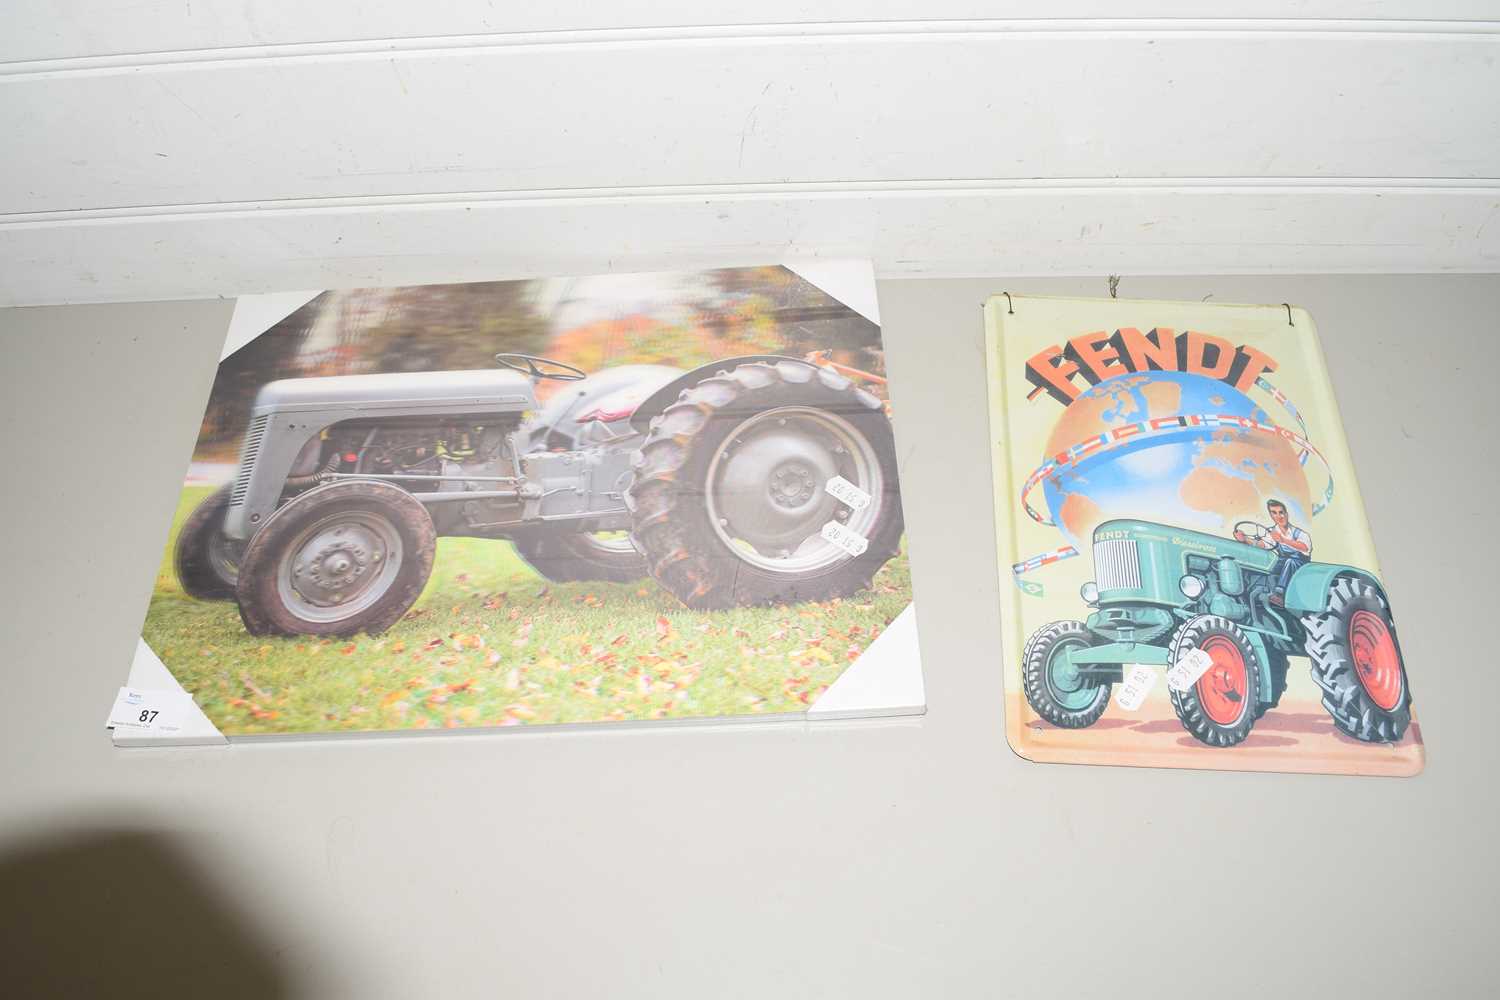 HOLOGRAPHIC PICTURE OF A GREY FERGUSON TRACTOR TOGETHER WITH A REPRODUCTION METAL FENDT